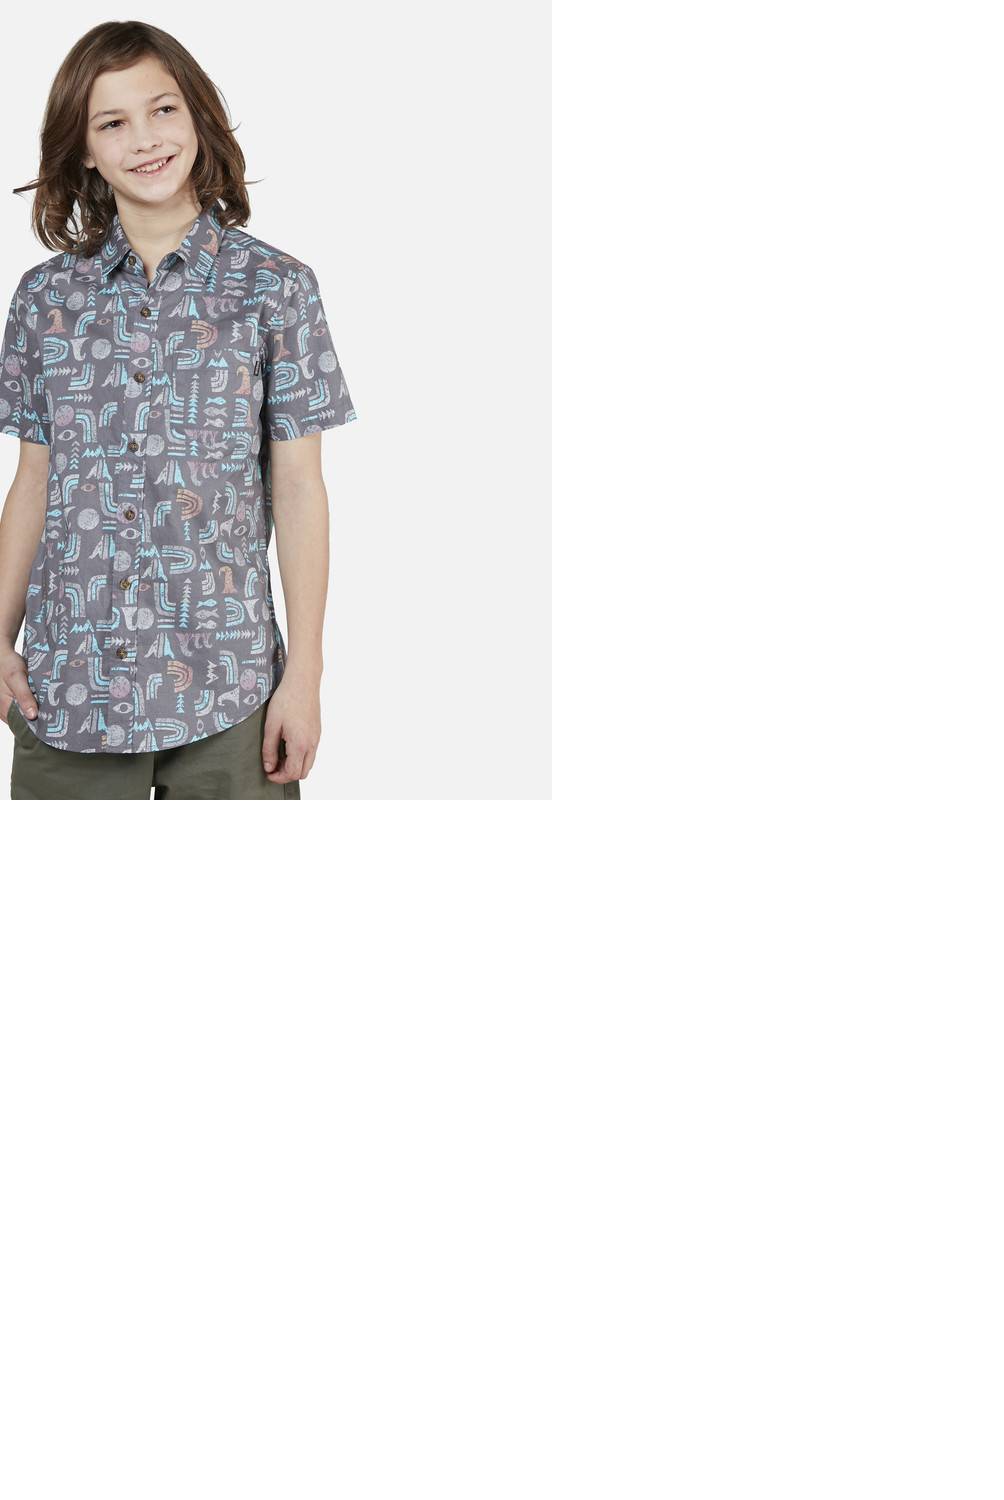 MAUI AND SONS - Camisa M/C 5C936 Gris